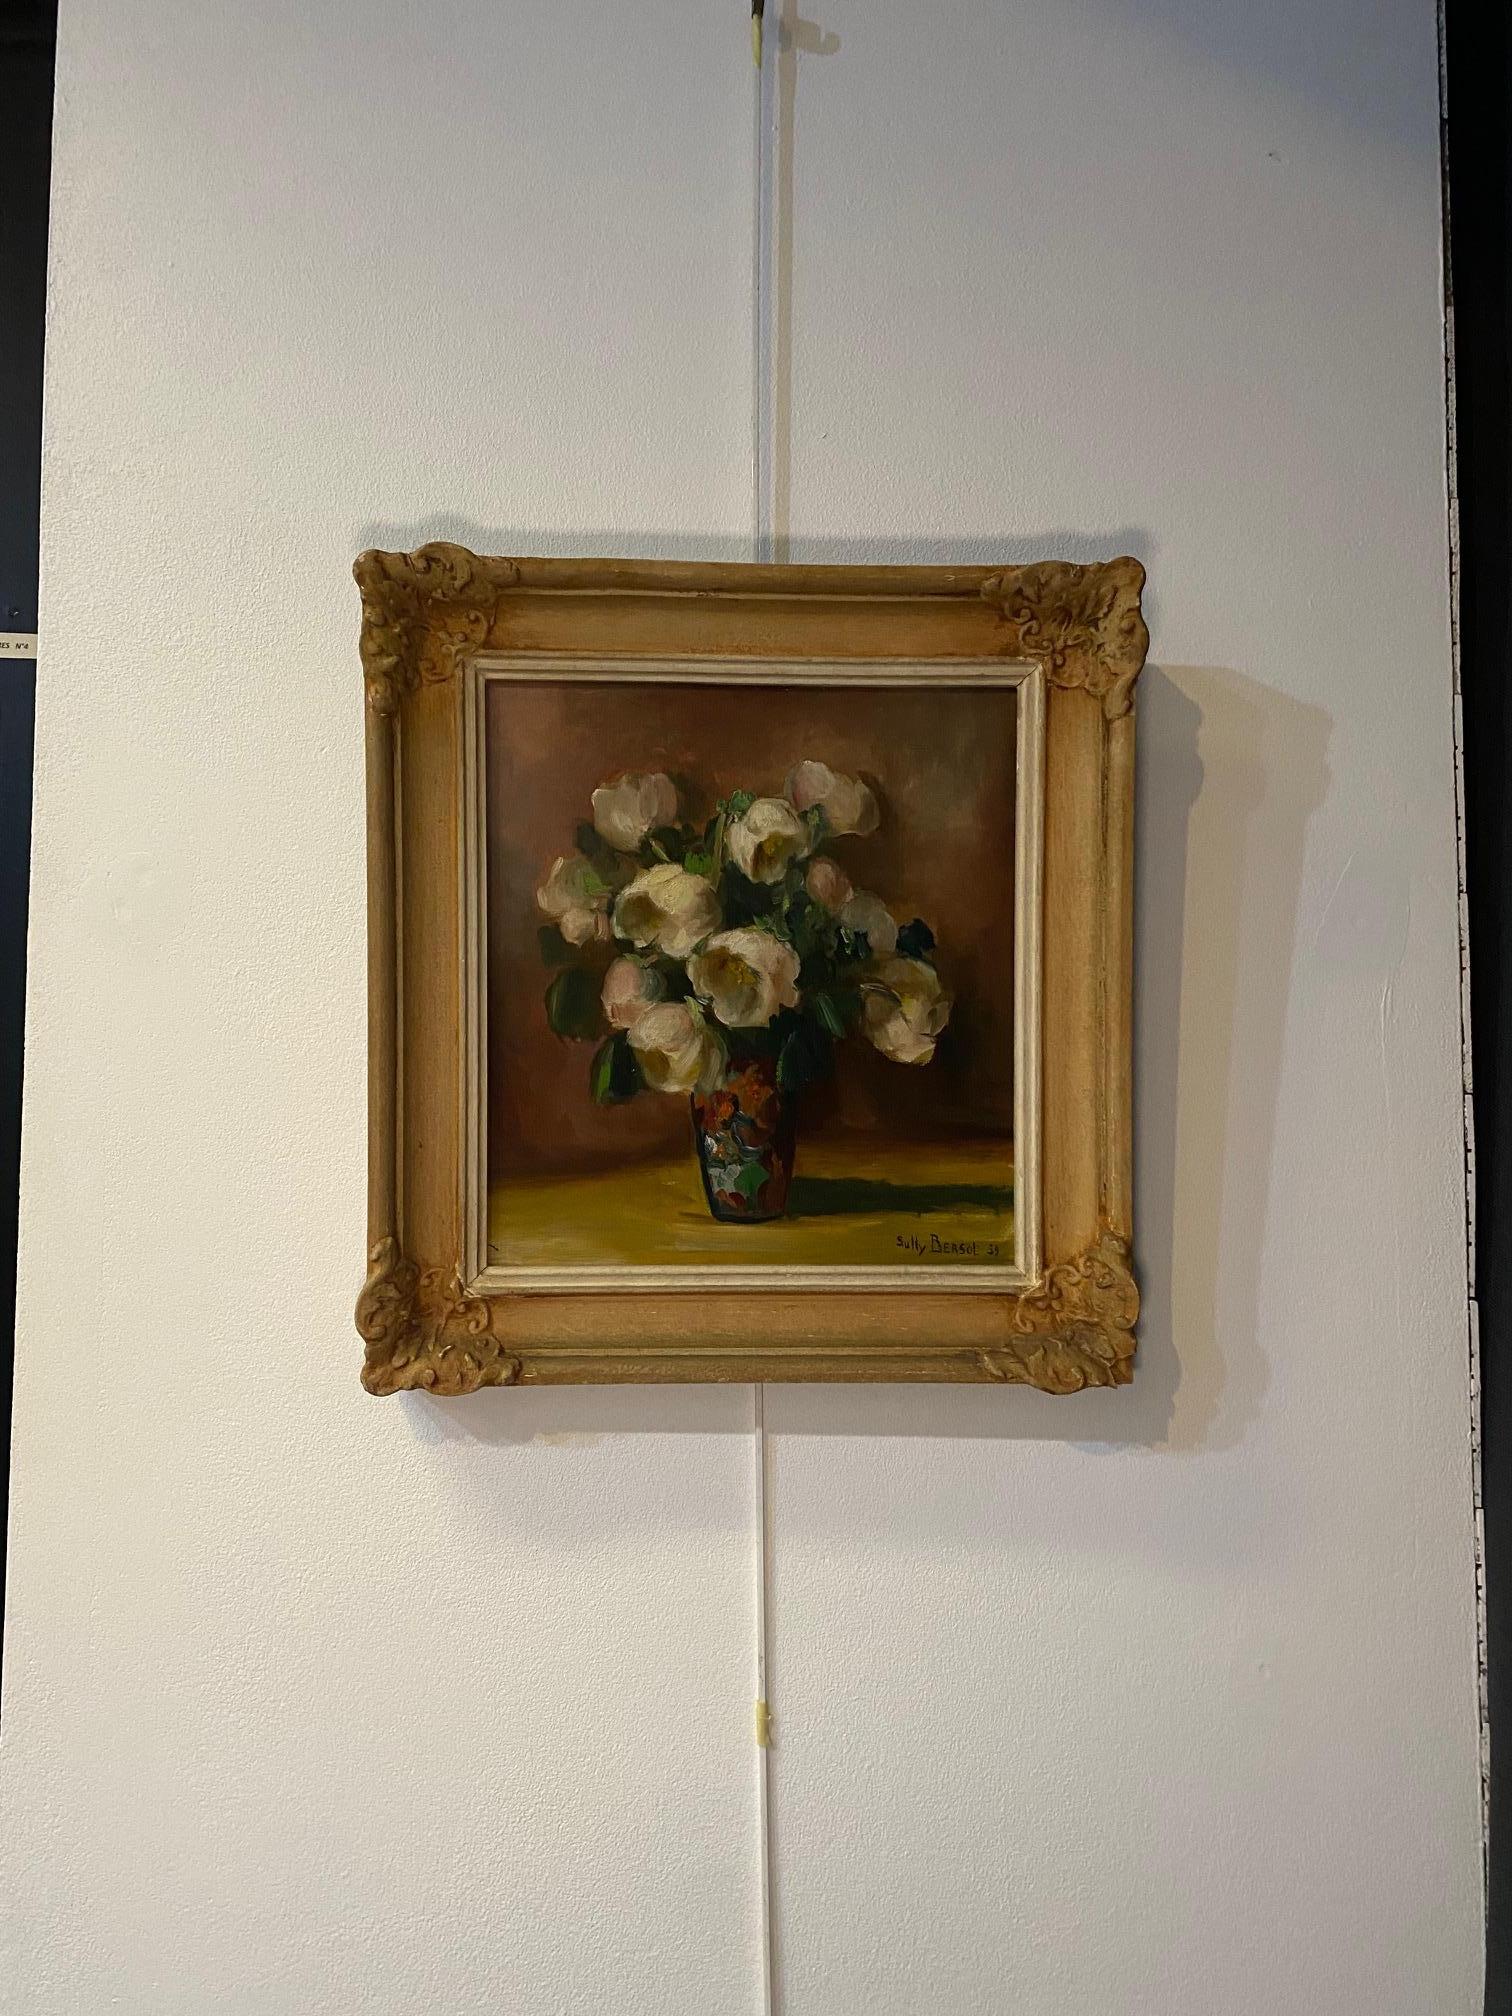 White Roses bouquet by Sully Bersot - Oil on canvas 32x35 cm For Sale 3